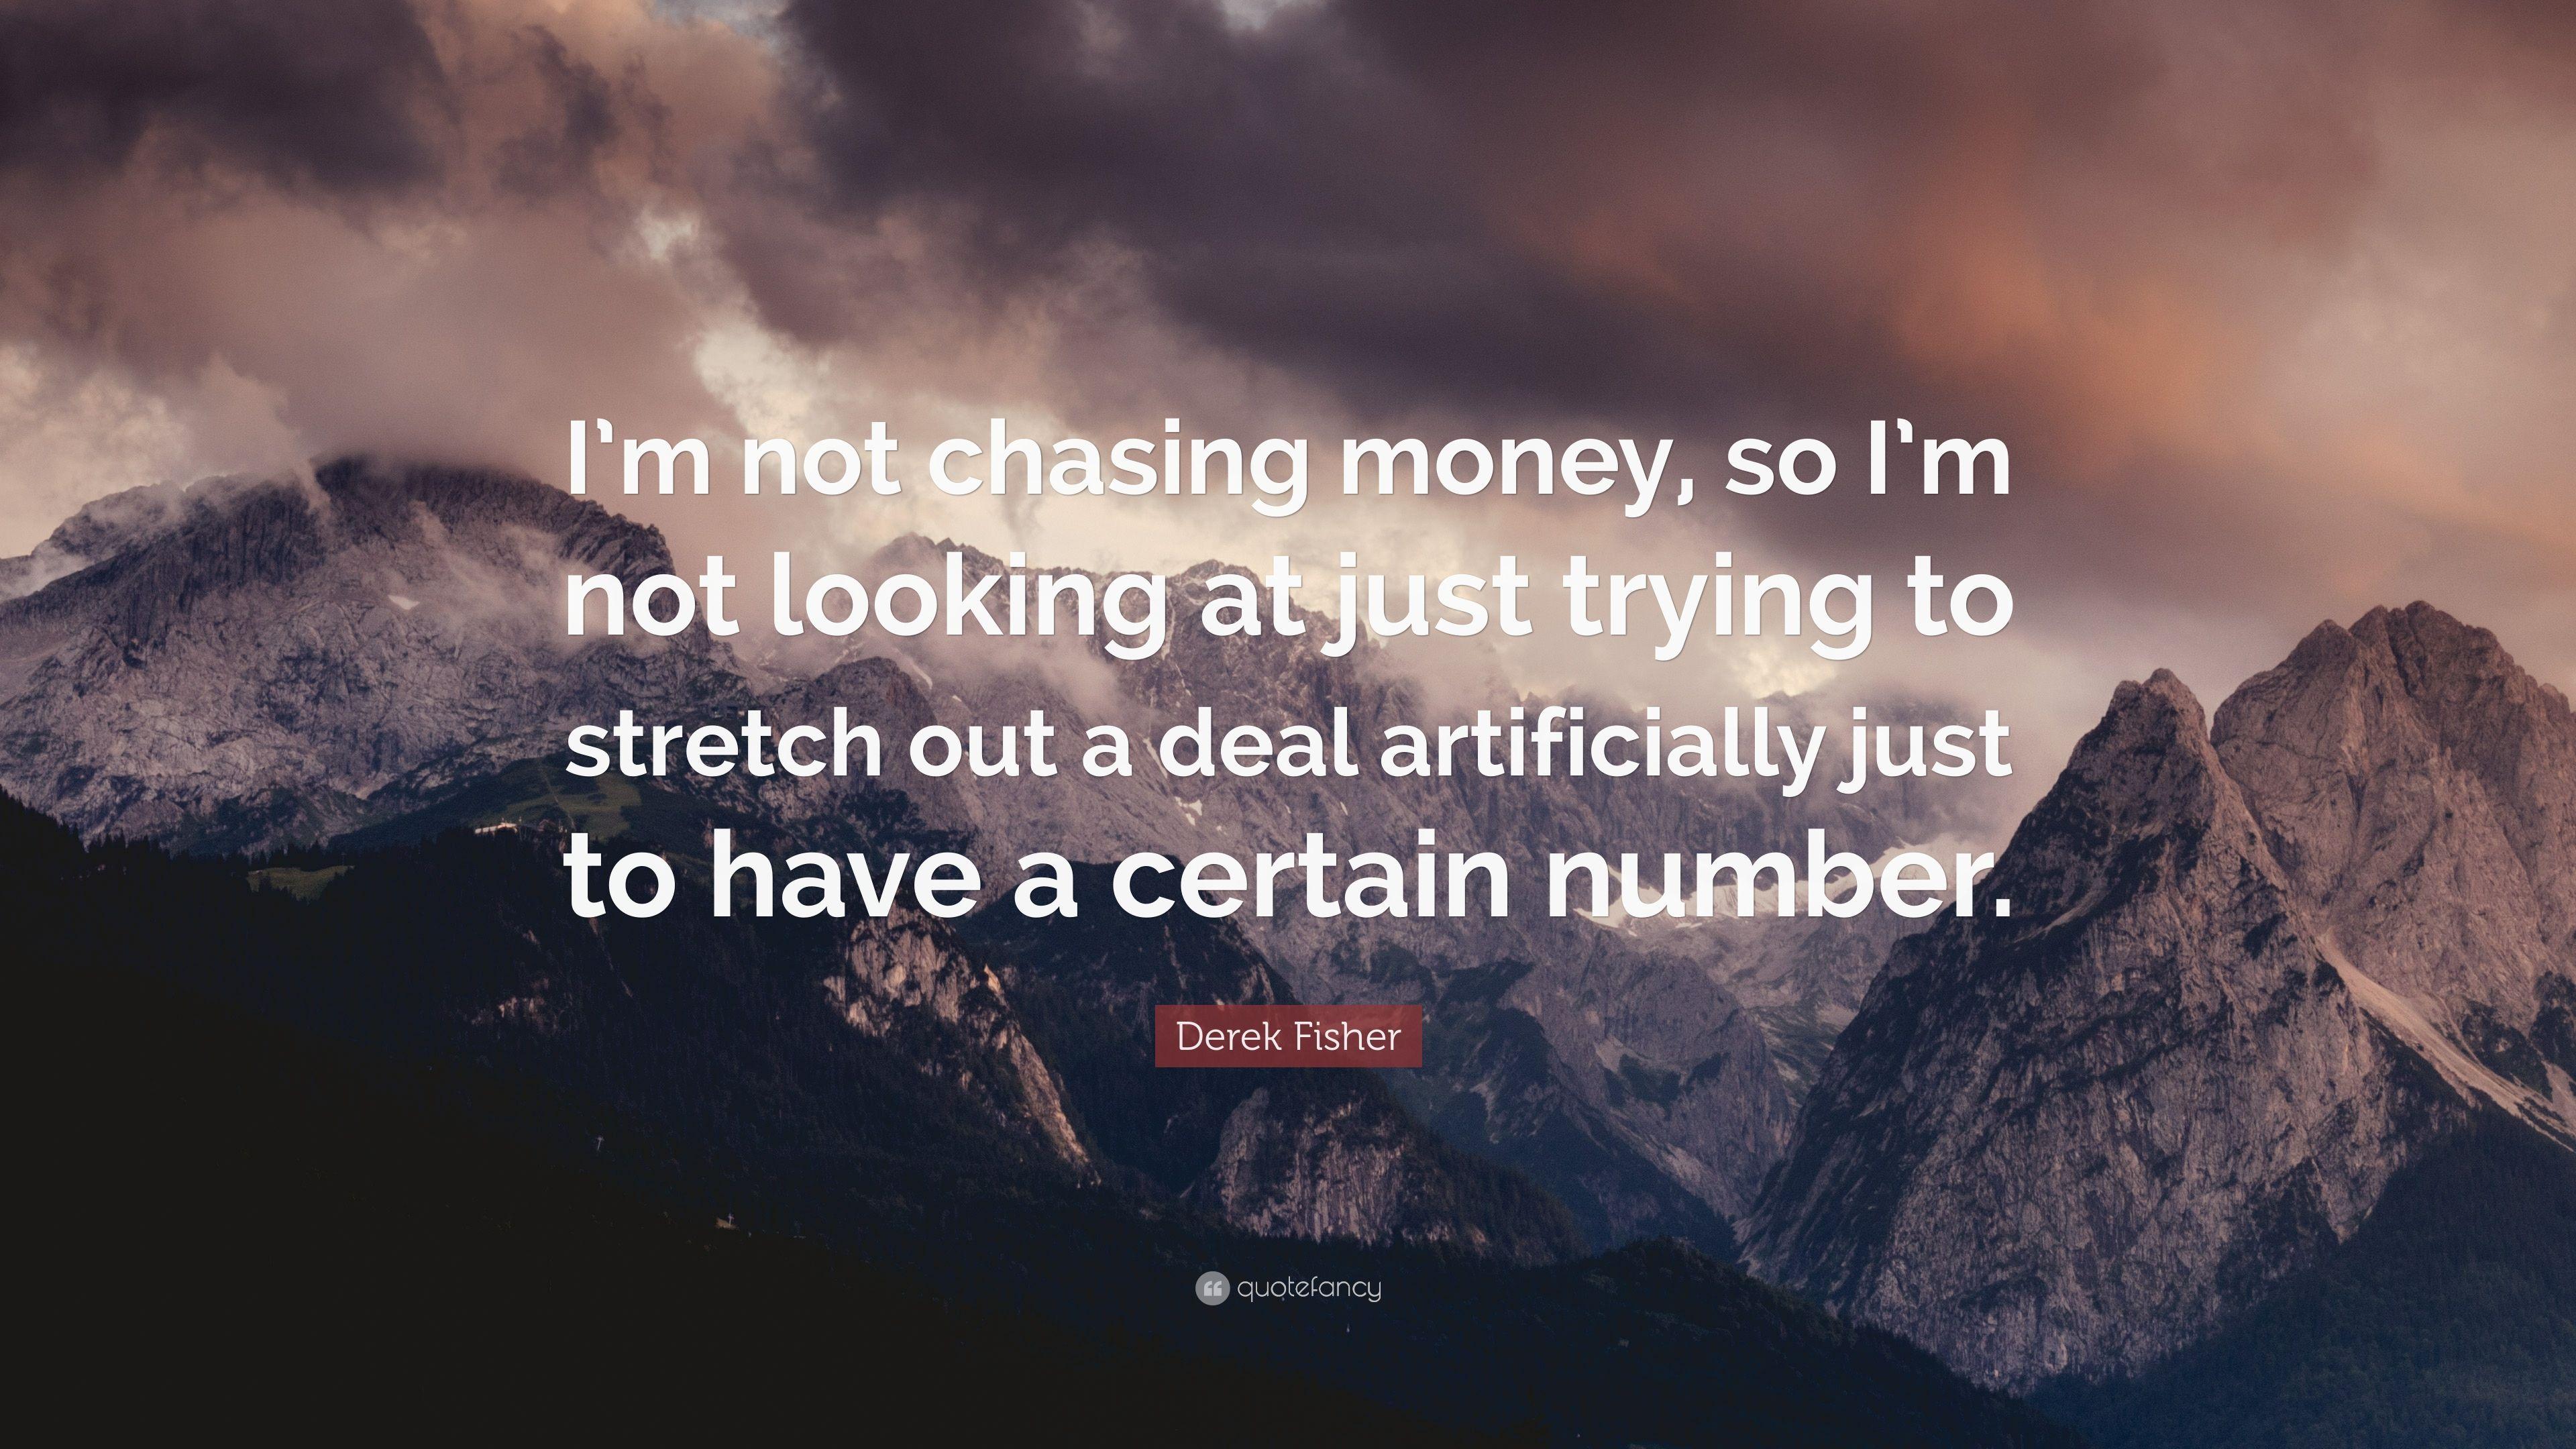 Derek Fisher Quote: “I'm not chasing money, so I'm not looking at